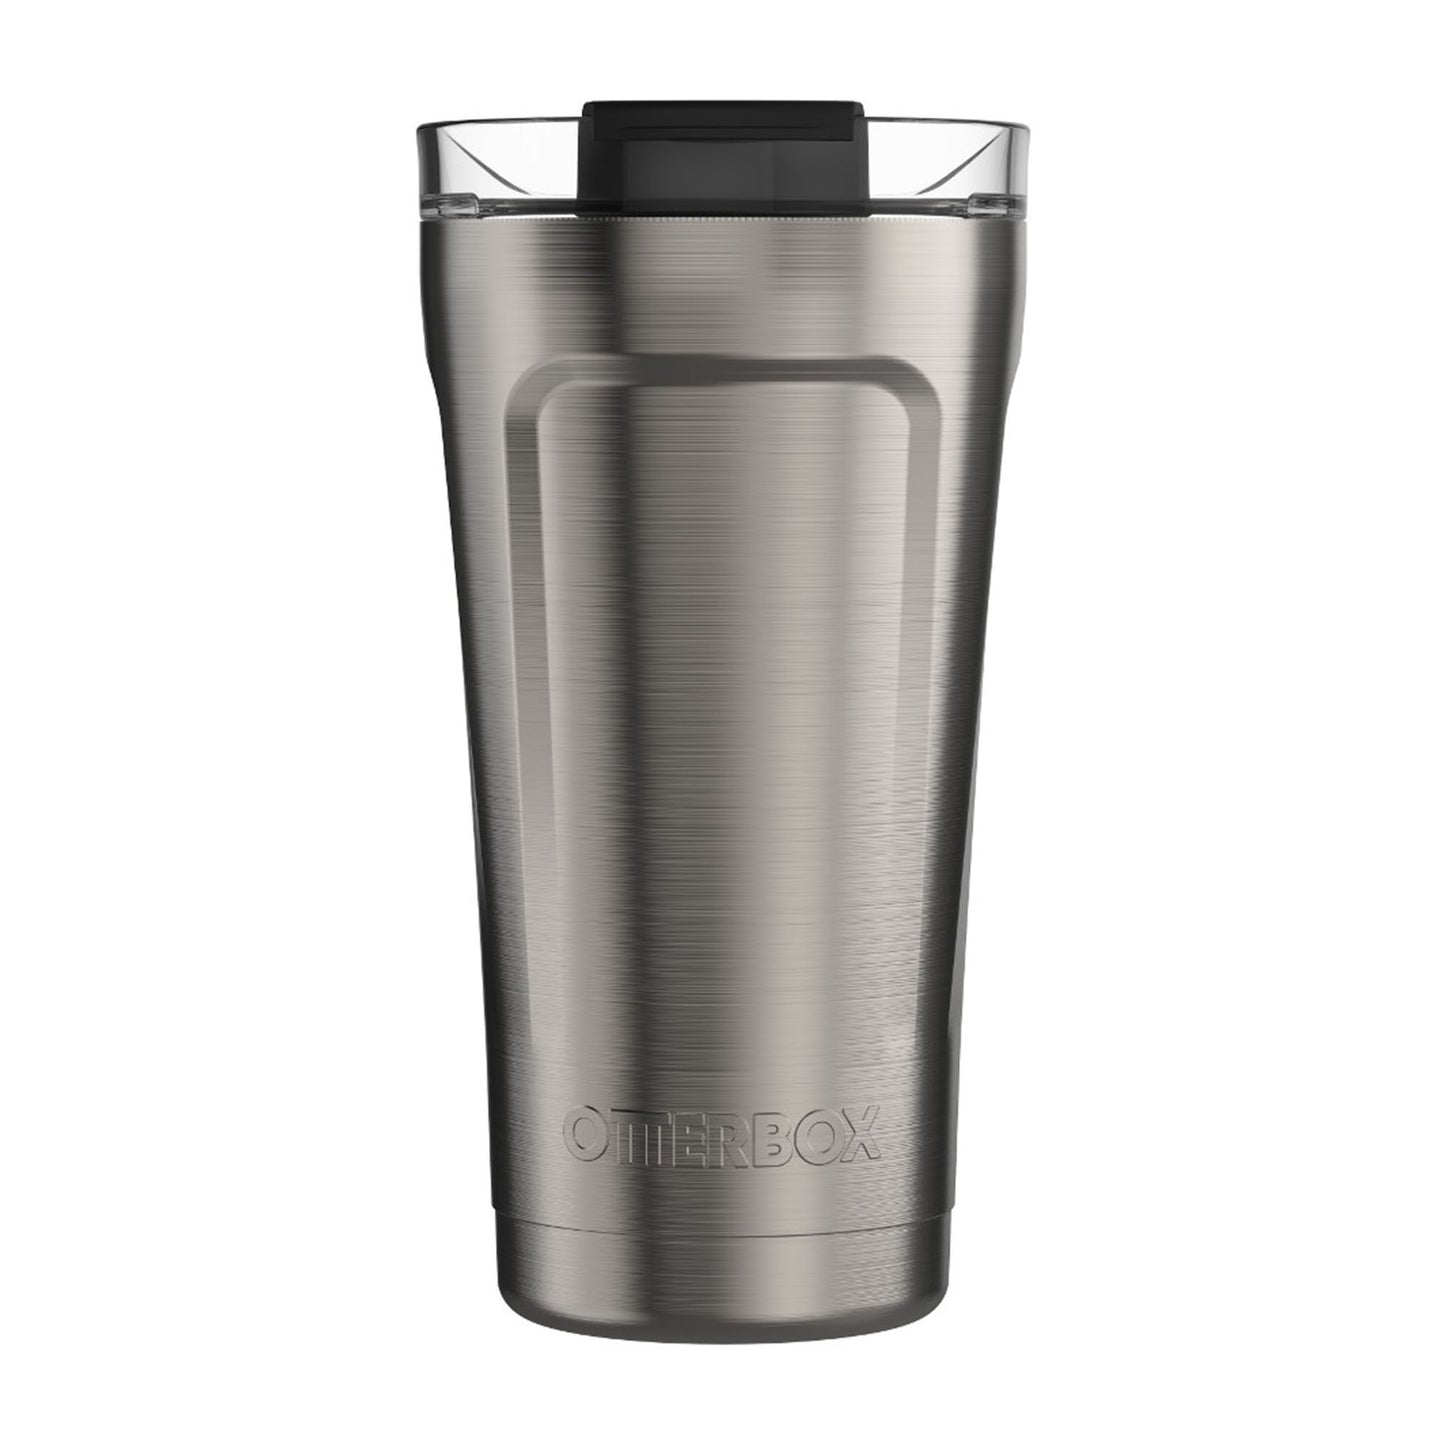 Otterbox Stainless Steel Elevation (Clear Stainless) 16oz Tumbler w/Closed Lid - 15-04961